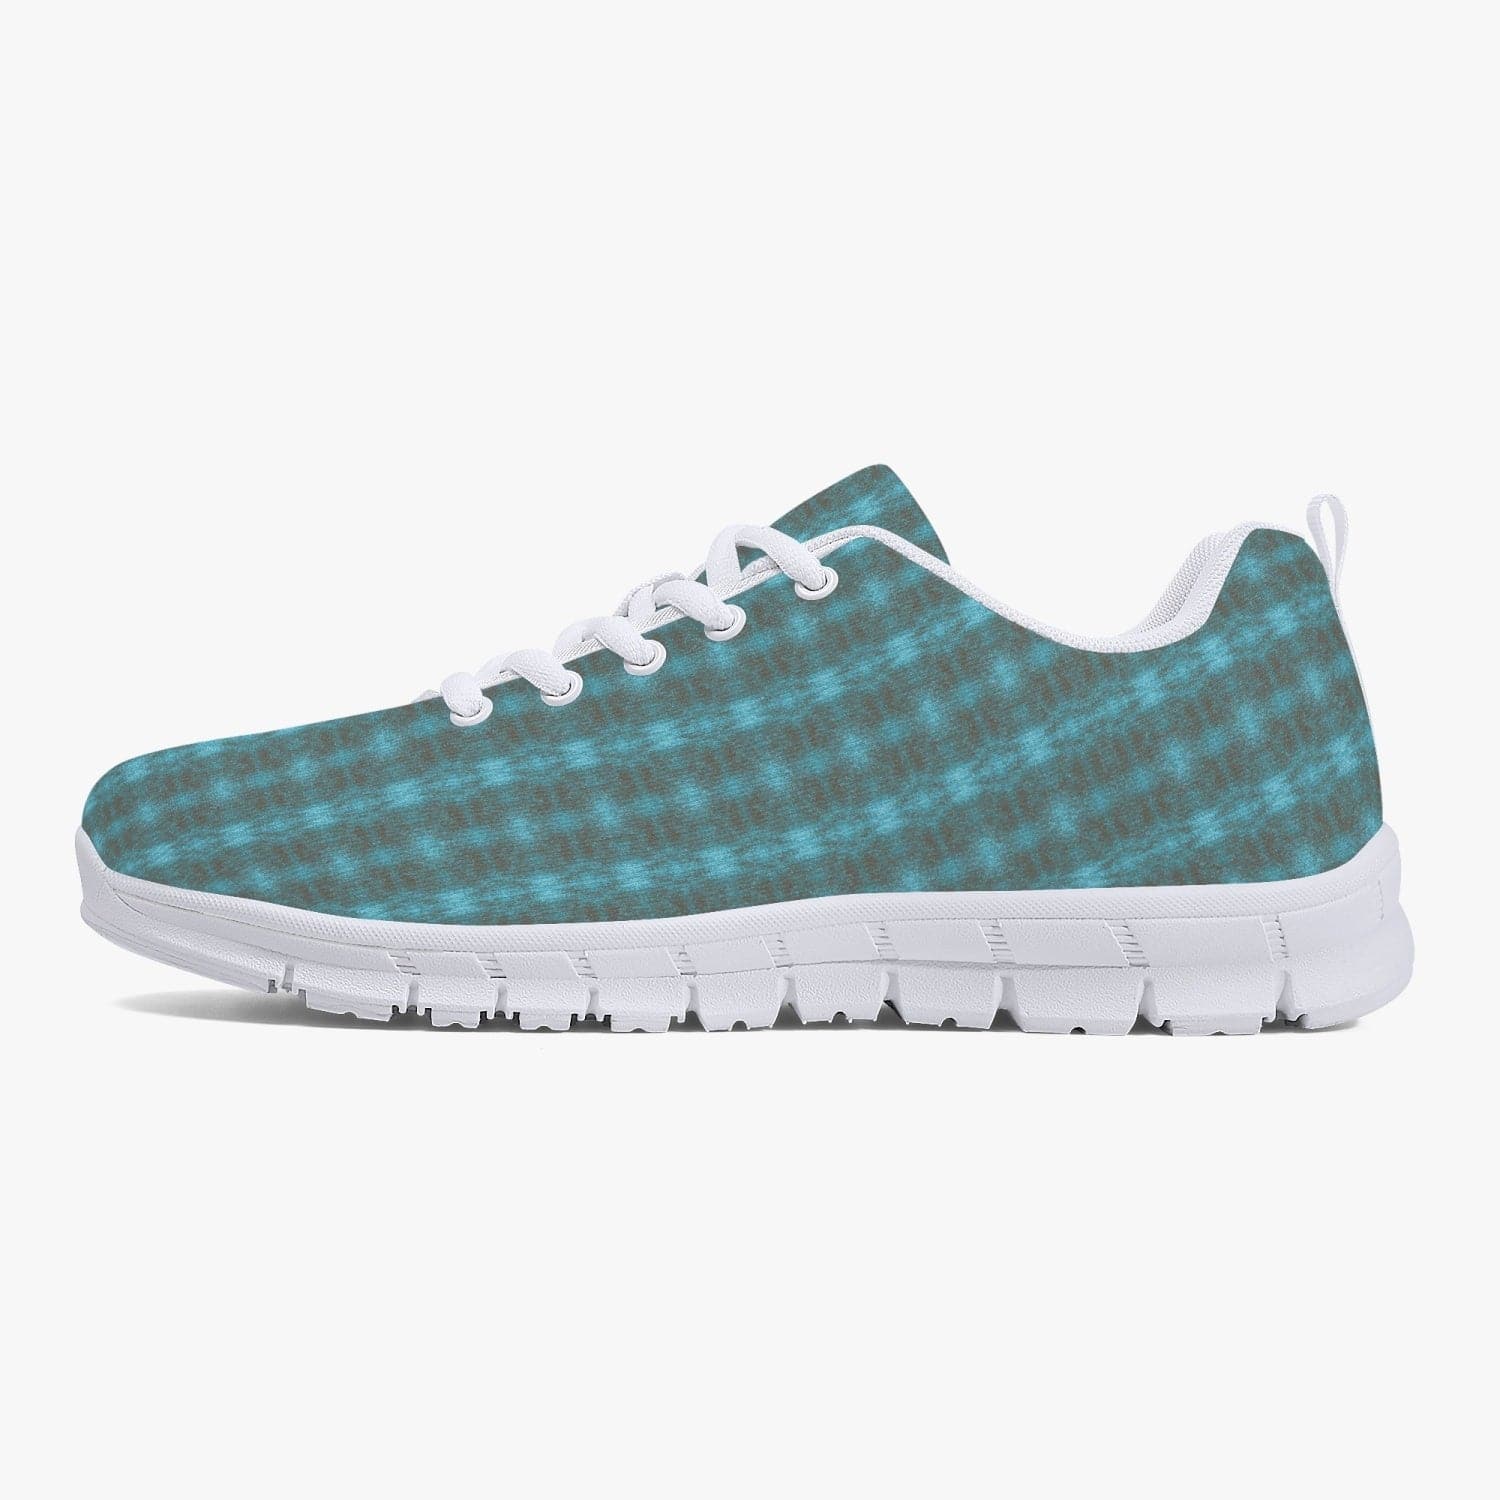 Blue Dots and Lines Every Season  Wear Classic Lightweight Mesh Sneakers for Men and Women (in White/Black), designed by Sensus Studio Design